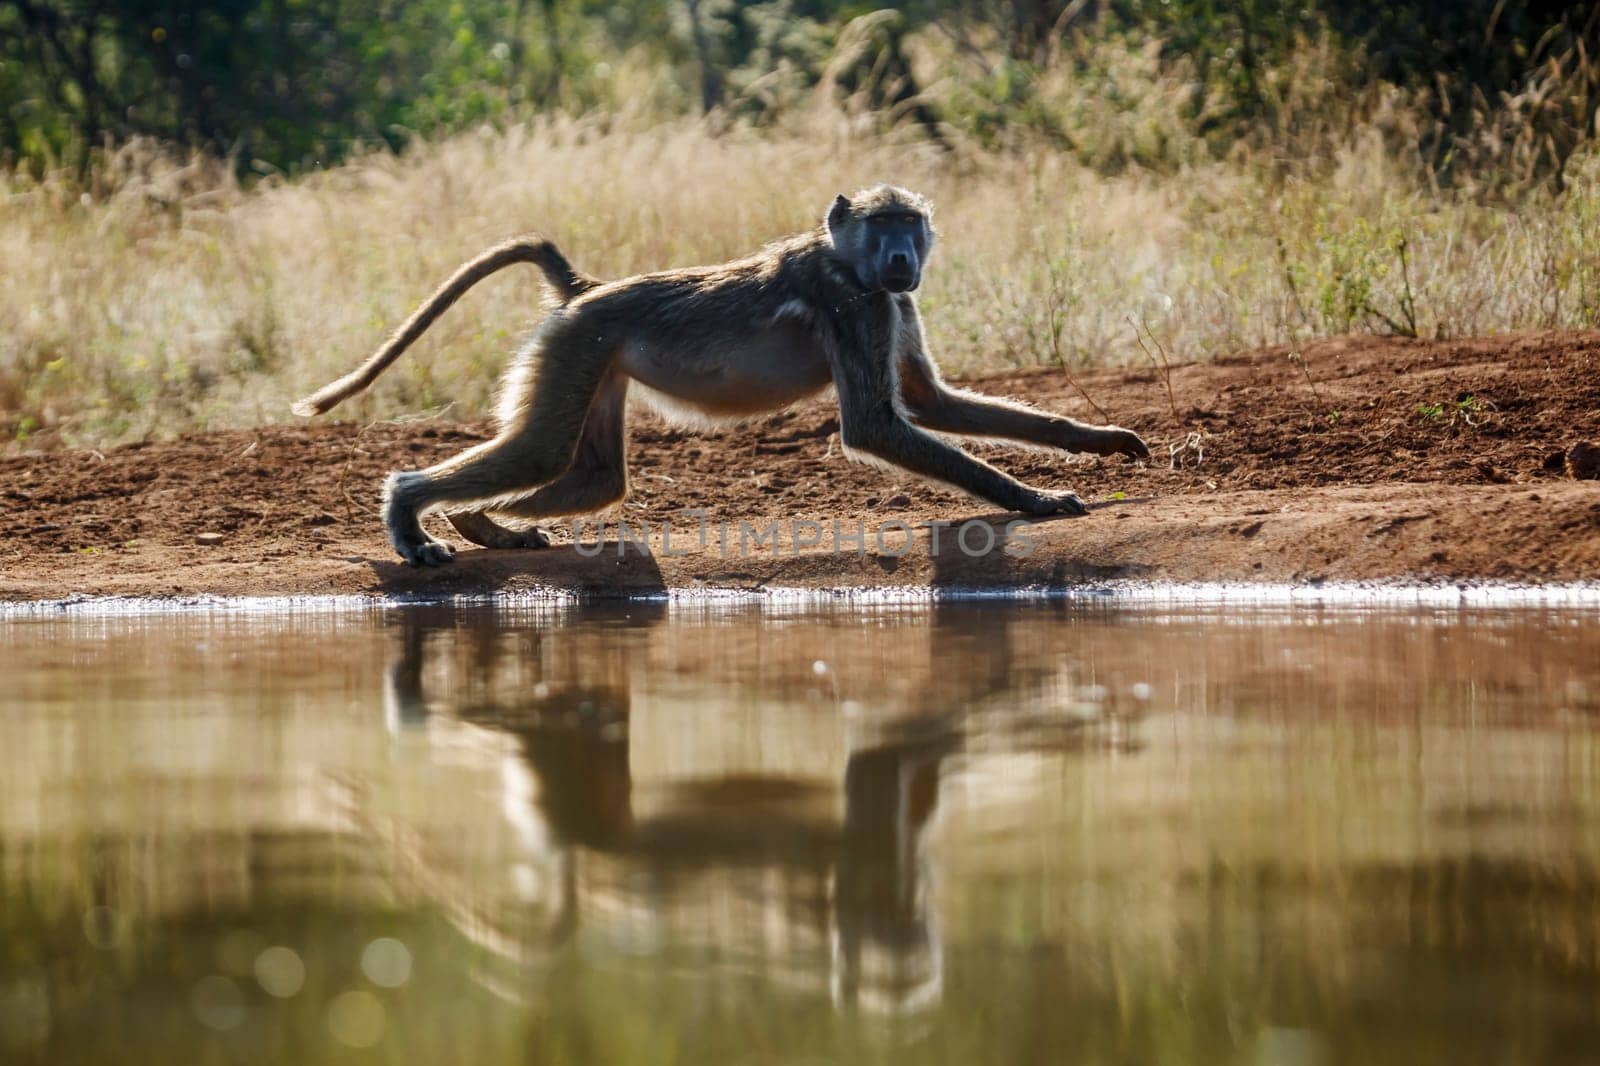 Chacma baboon in Kruger National park, South Africa by PACOCOMO